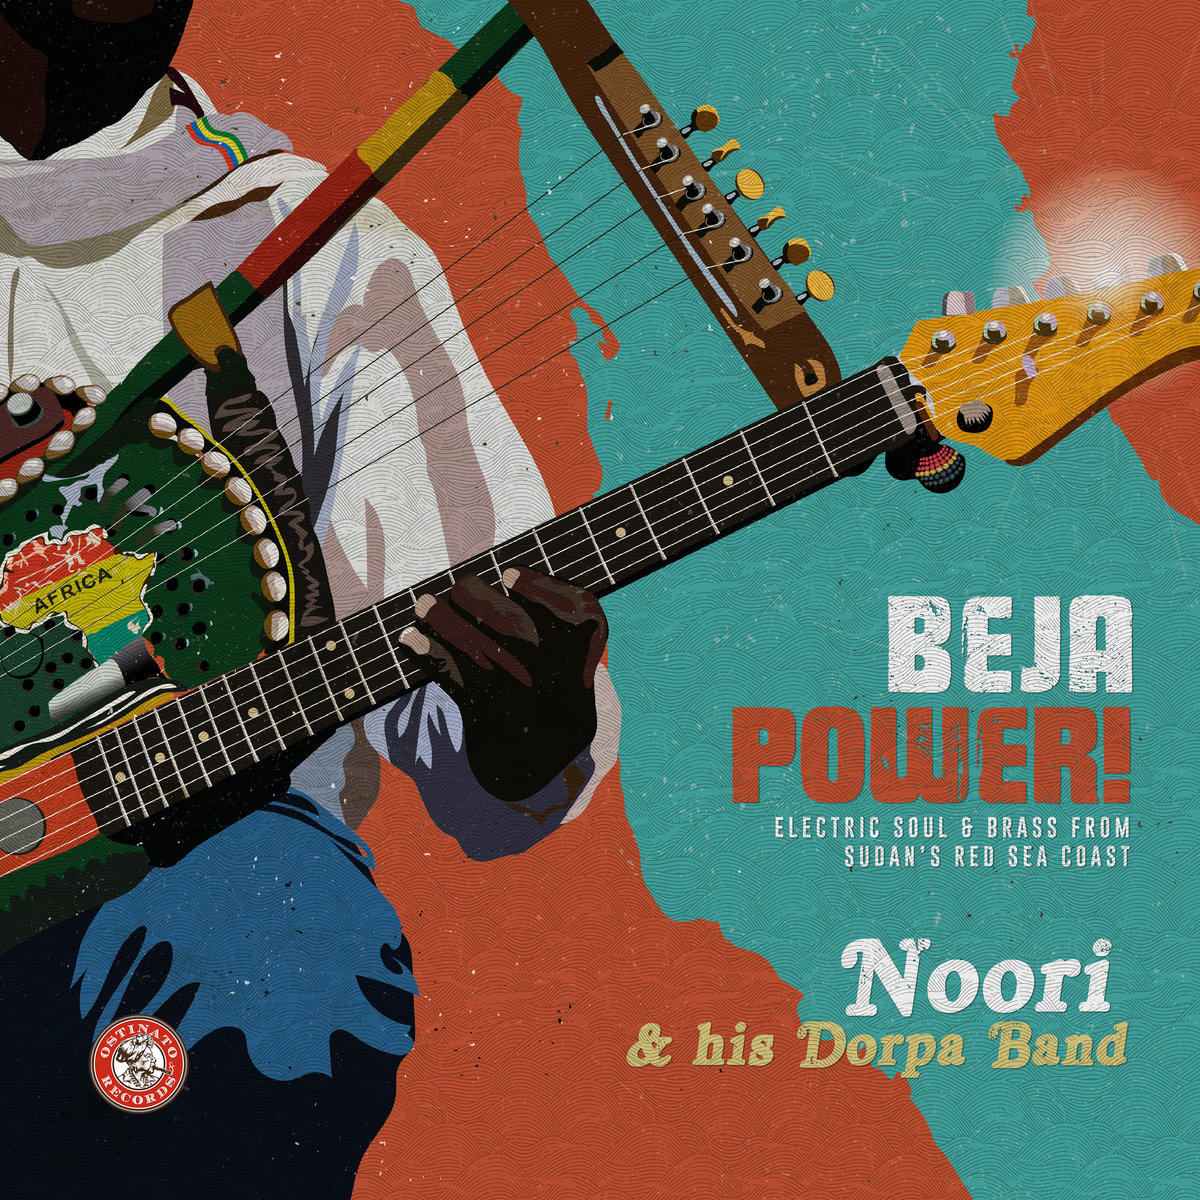 Band Sea Beja His from Coast Electric & Dorpa Brass Noori | Red uabab Sudan\'s & Soul Power!